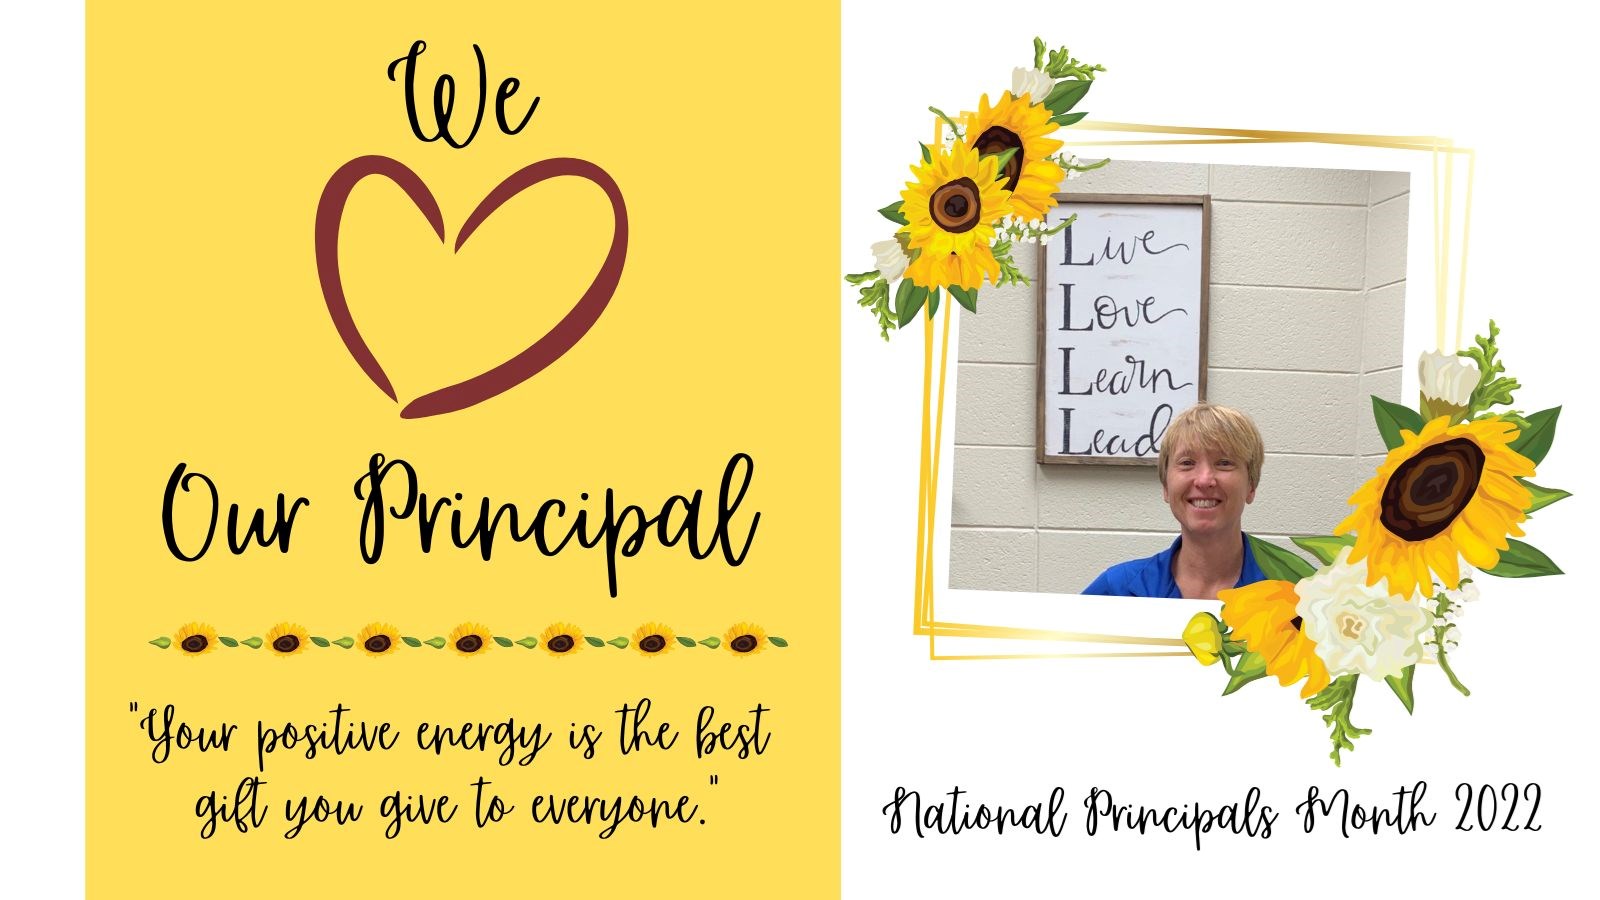 October is National Principals' Month